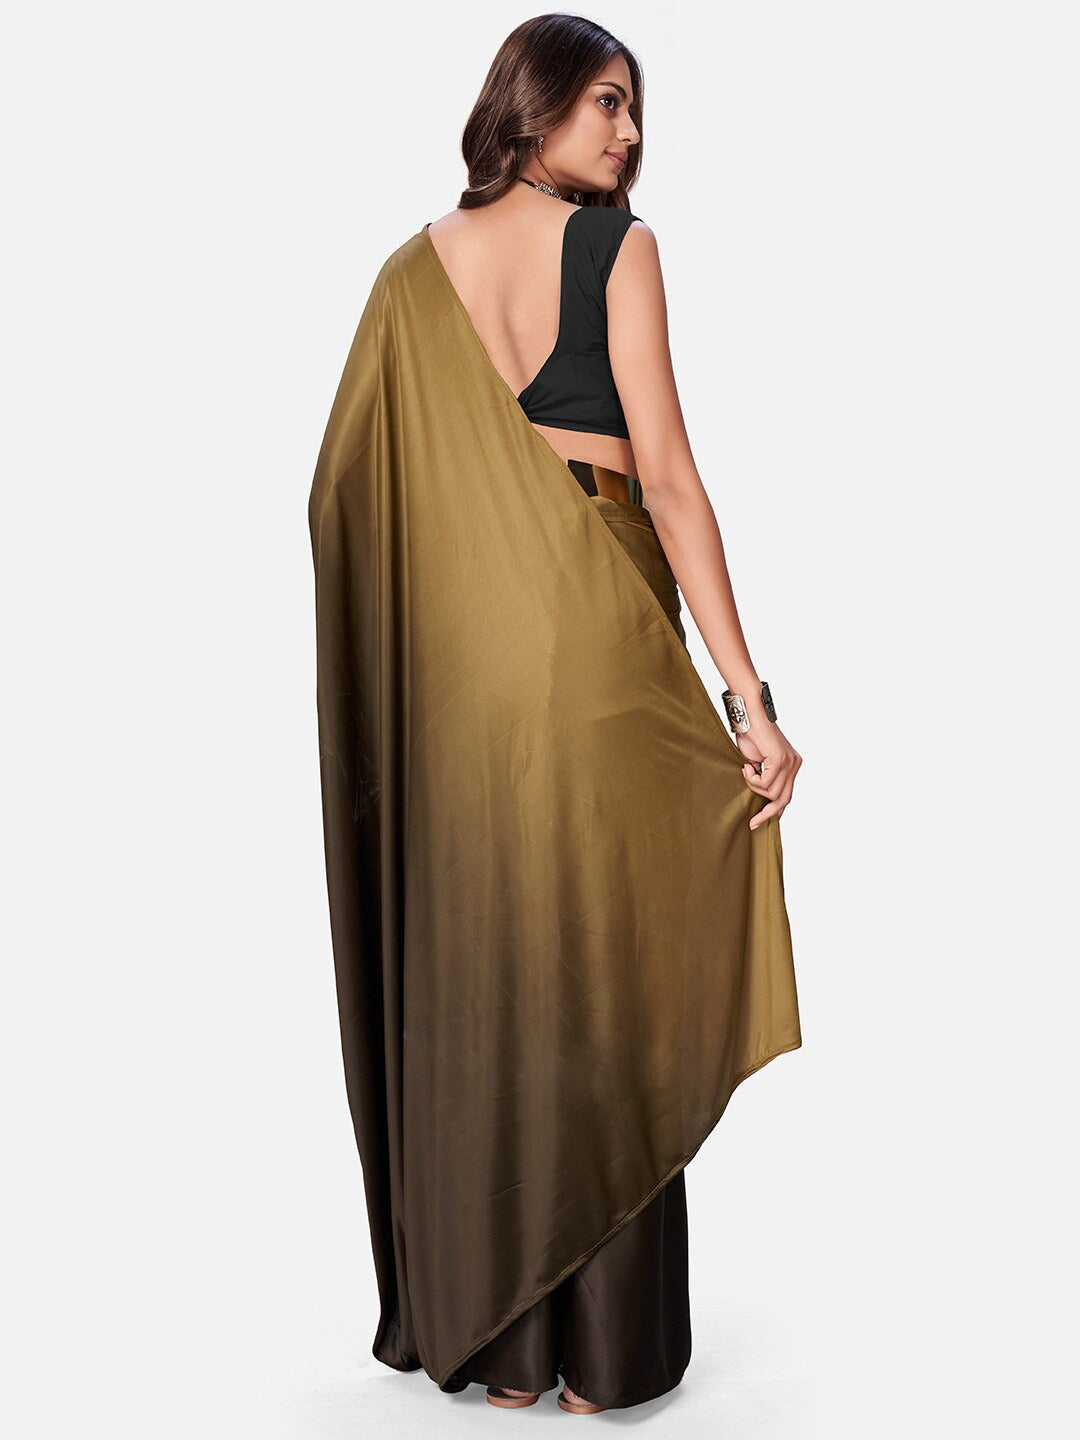 Gold Color Ready to wear Lycra saree with Metal Belt - Cloth